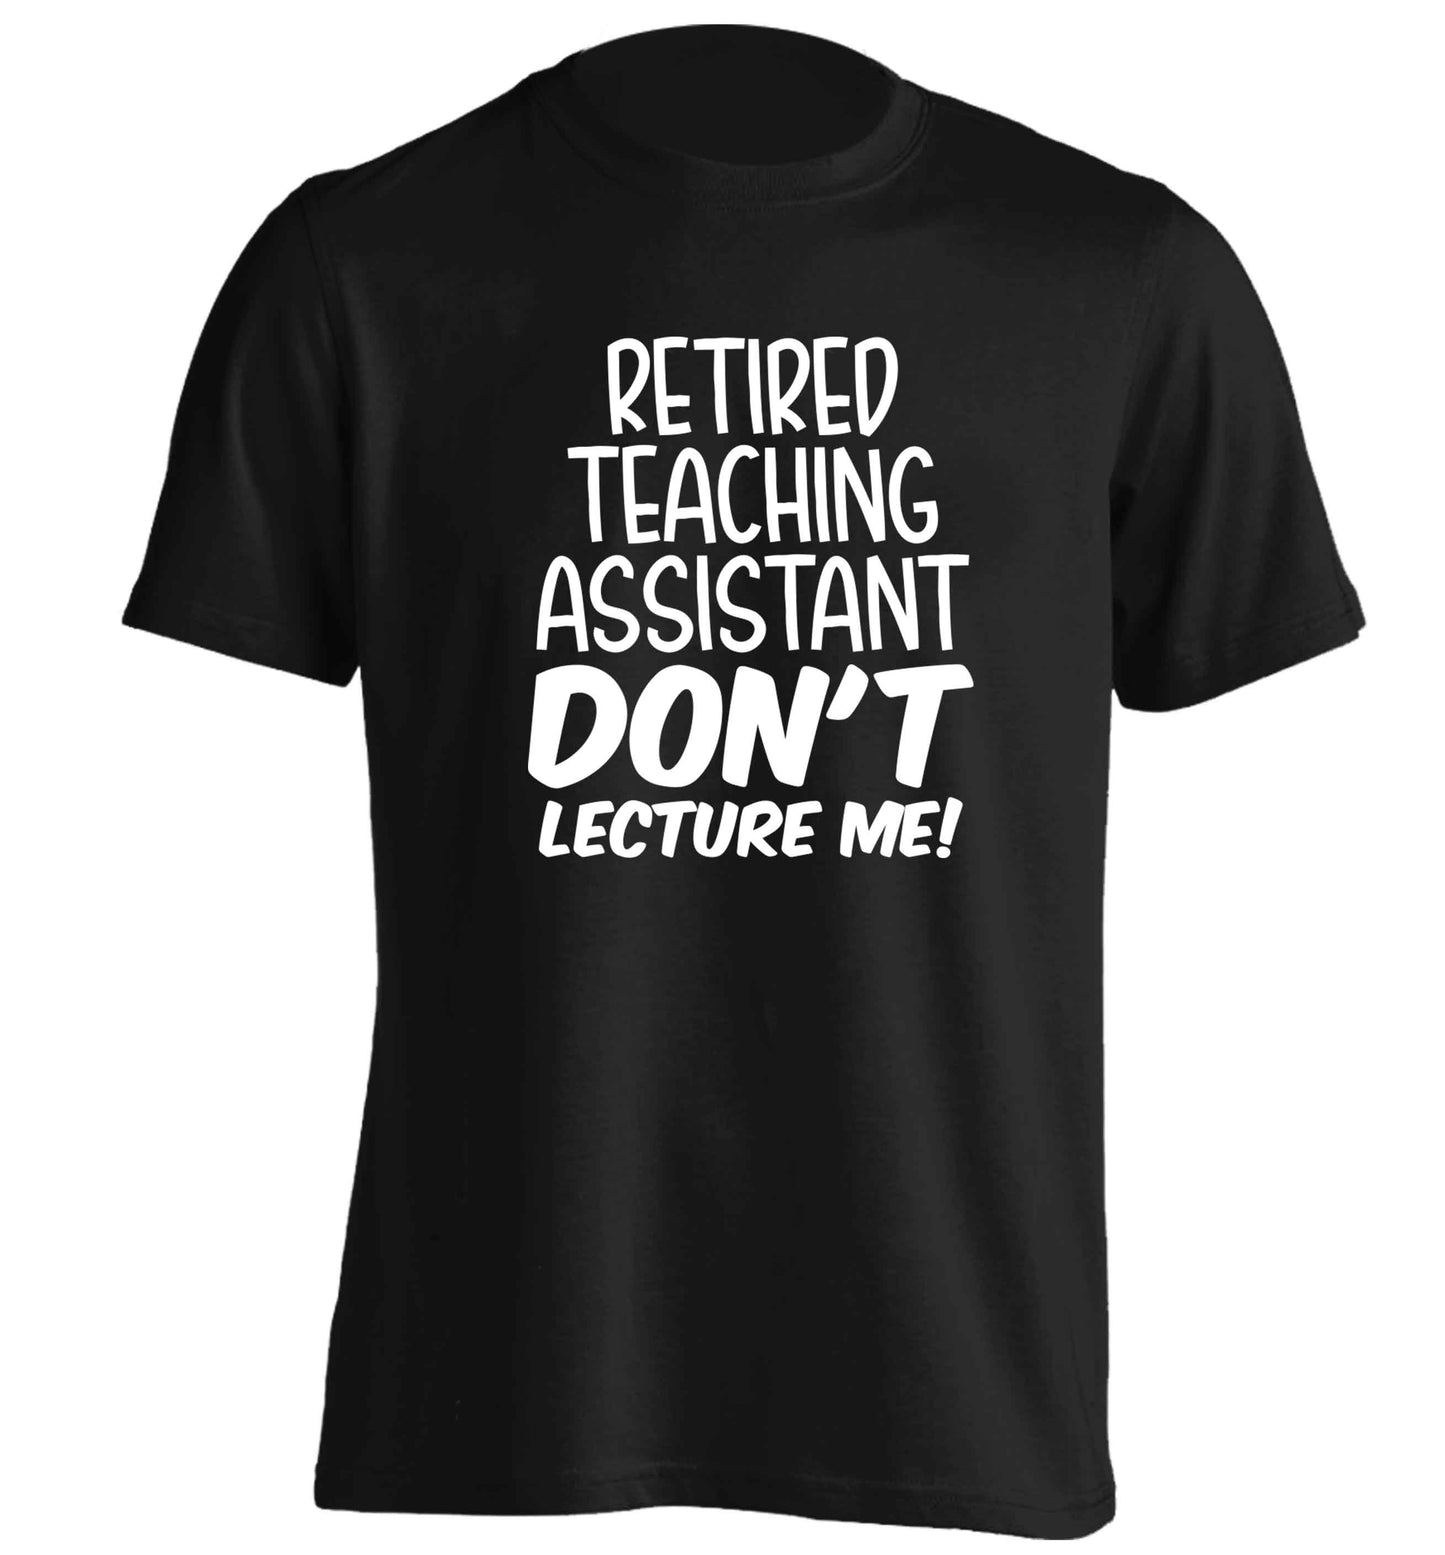 Retired teaching assistant don't lecture me adults unisex black Tshirt 2XL